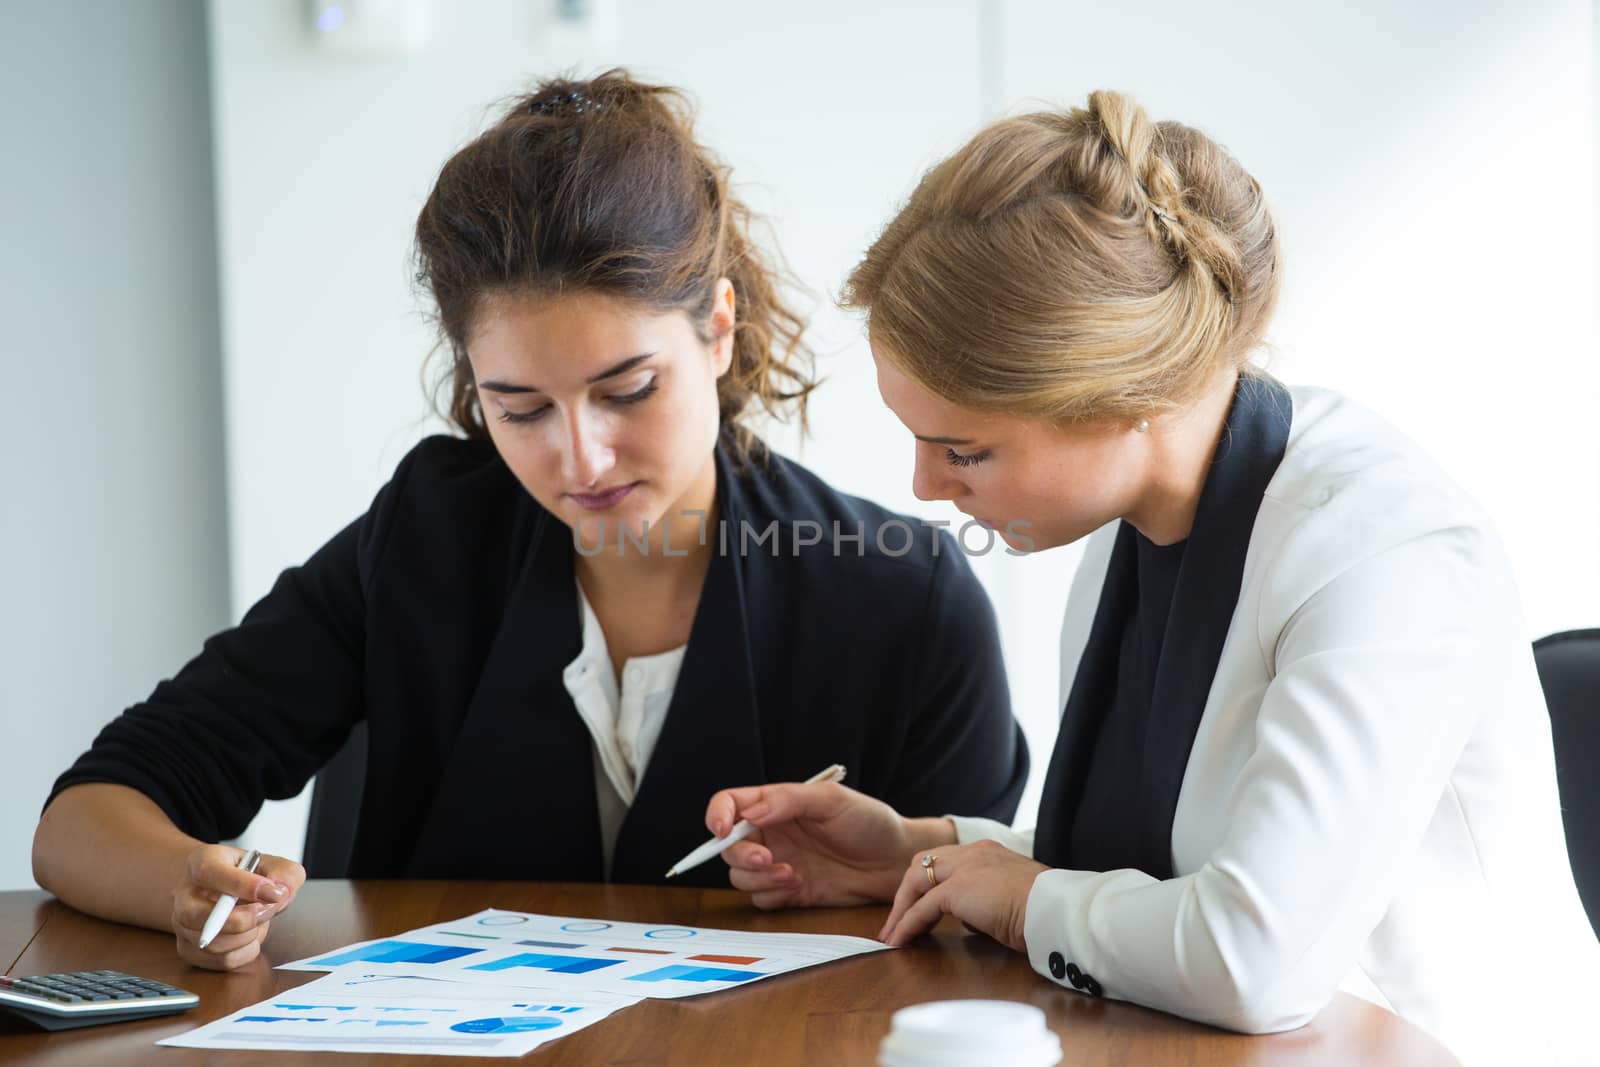 Business women working with financial diagrams, discussing financial reports at workplace